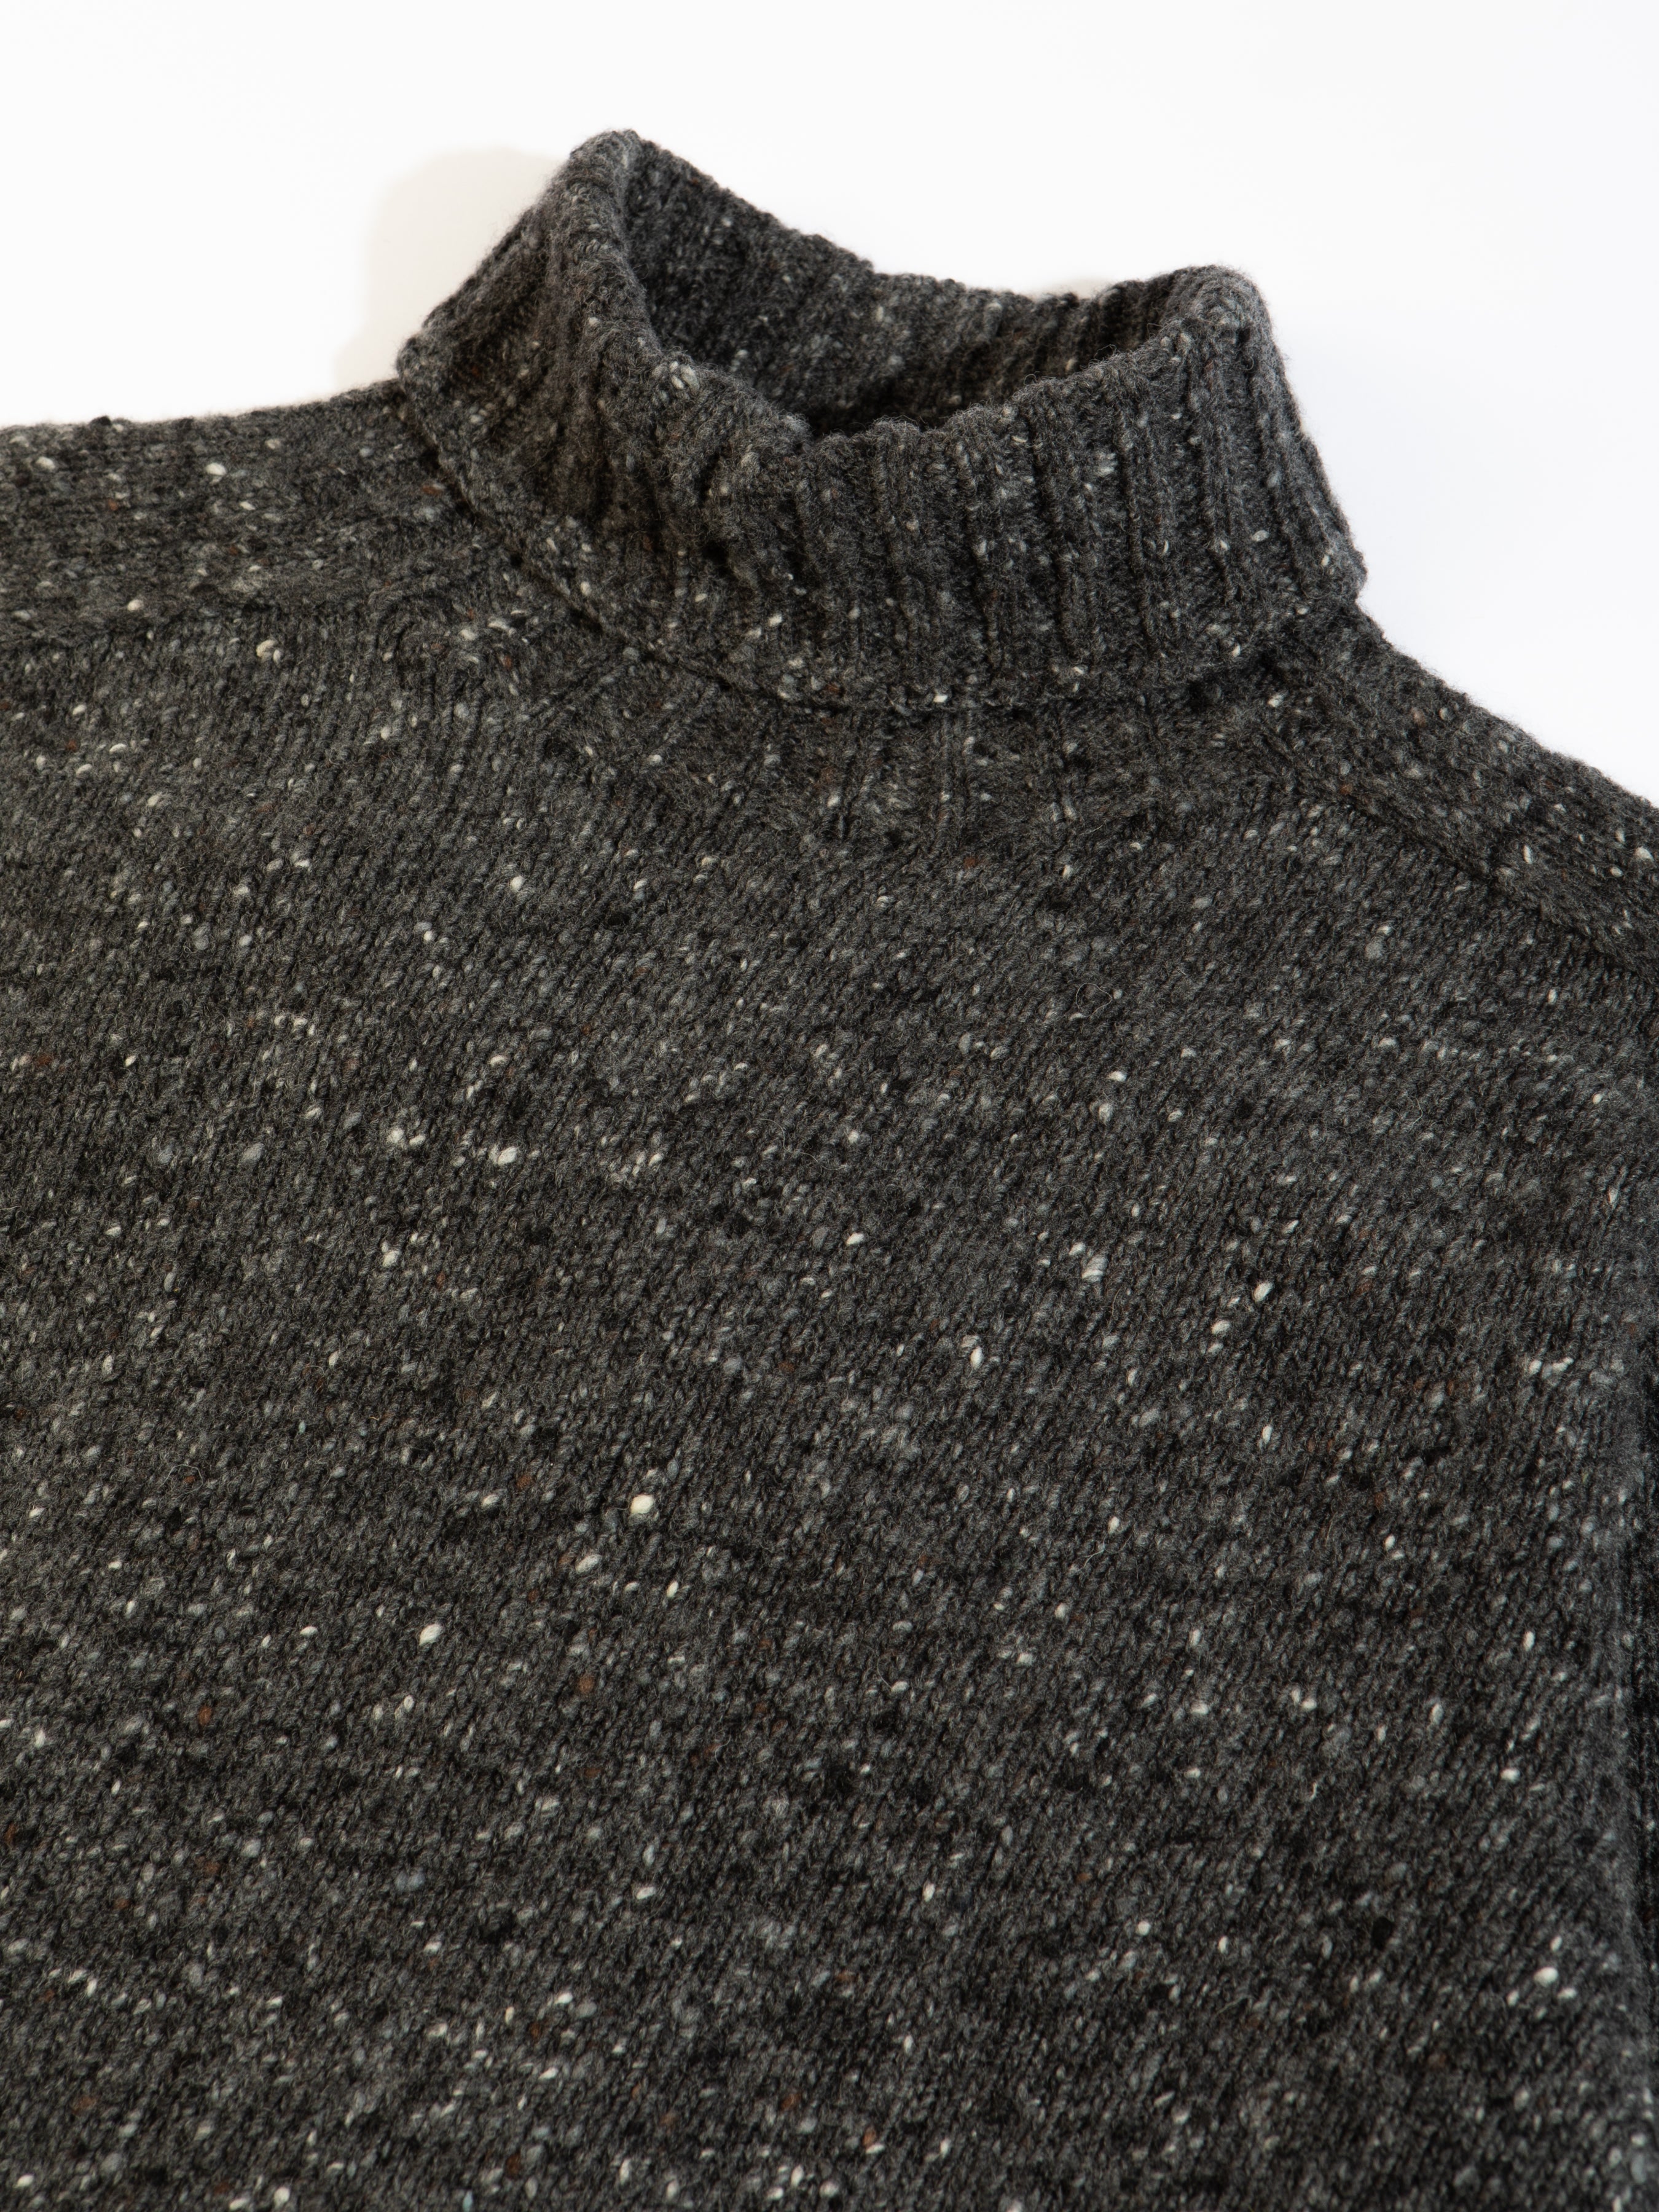 A knitted sweater from KESTIN, made in Scotland from Donegal wool in a charcoal grey.